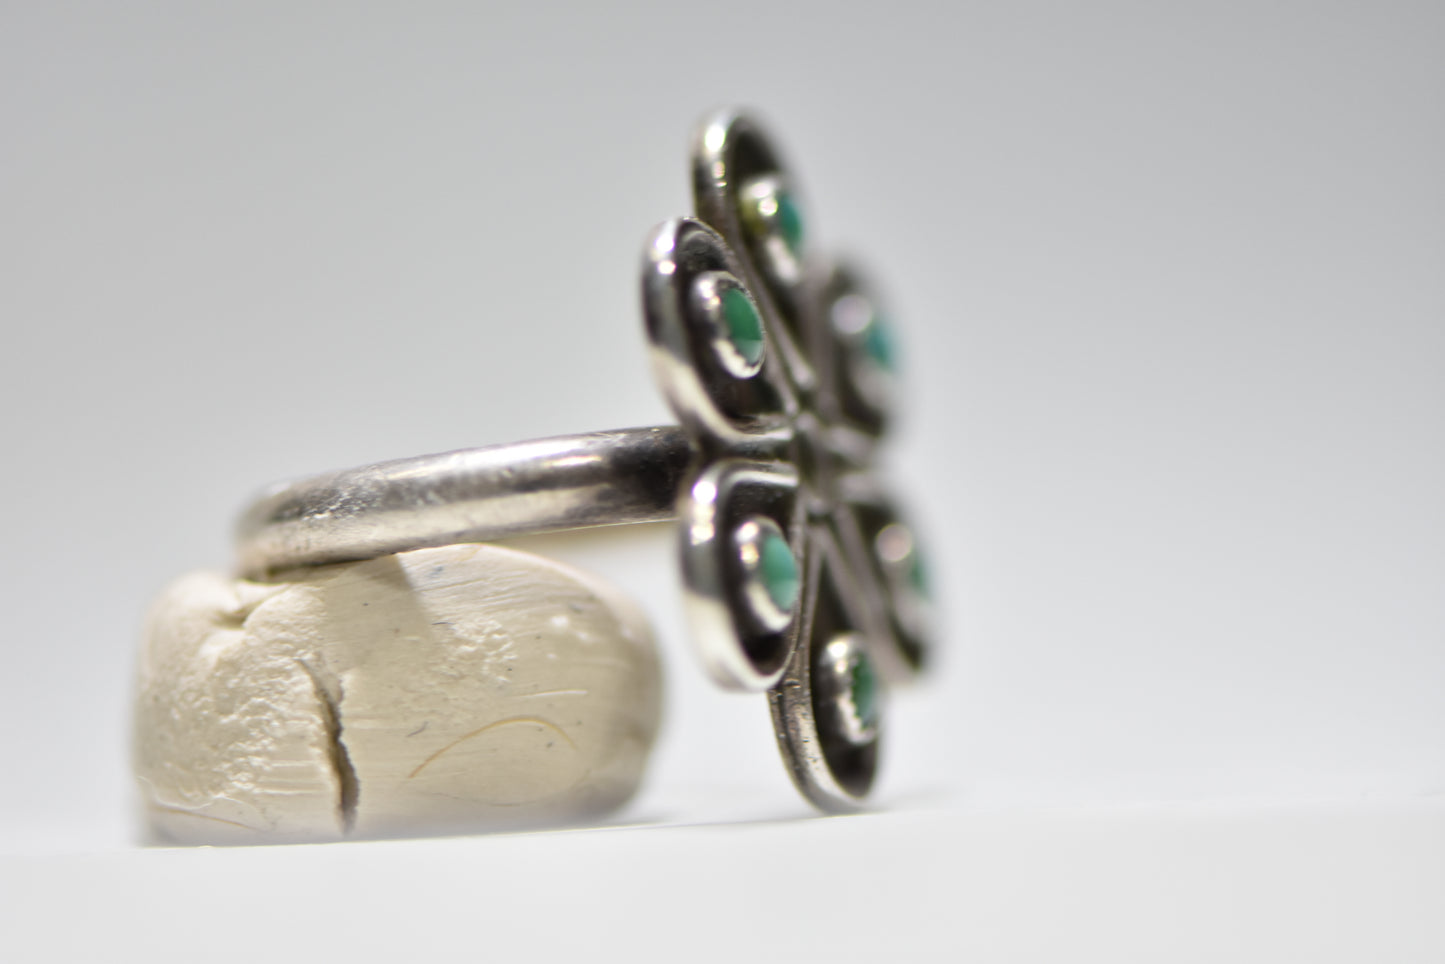 Zuni ring flower turquoise petite point sterling silver women